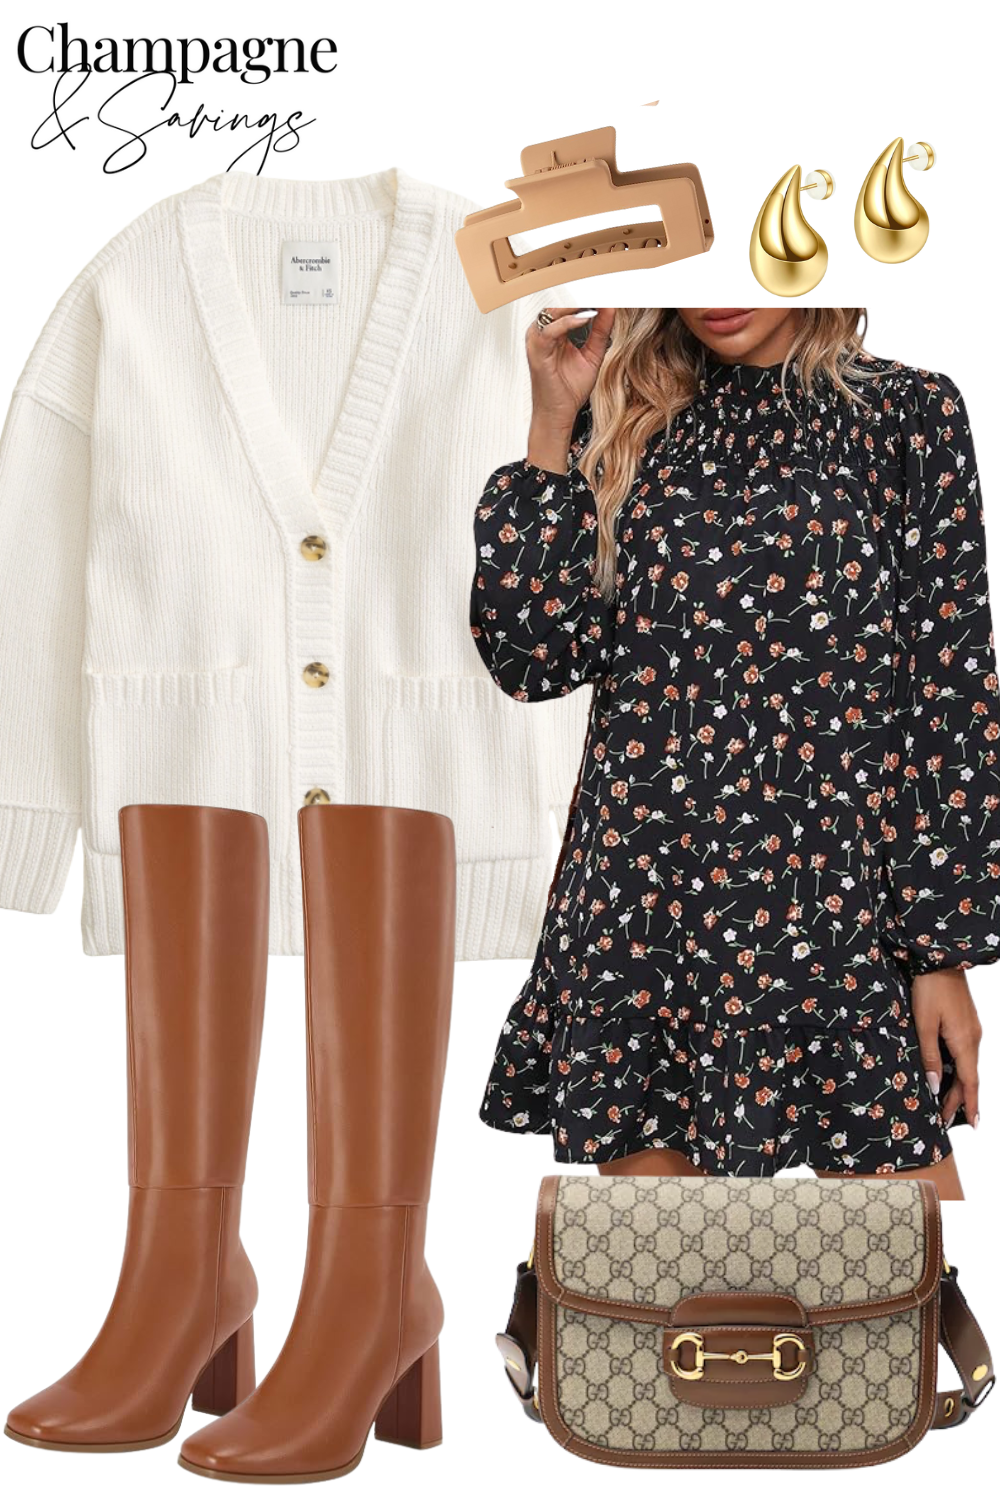 product collage with white cardigan, beige claw clip, gold tear drop earrings, black floral mini dress, brown riding boots, and gucci crossbody bag